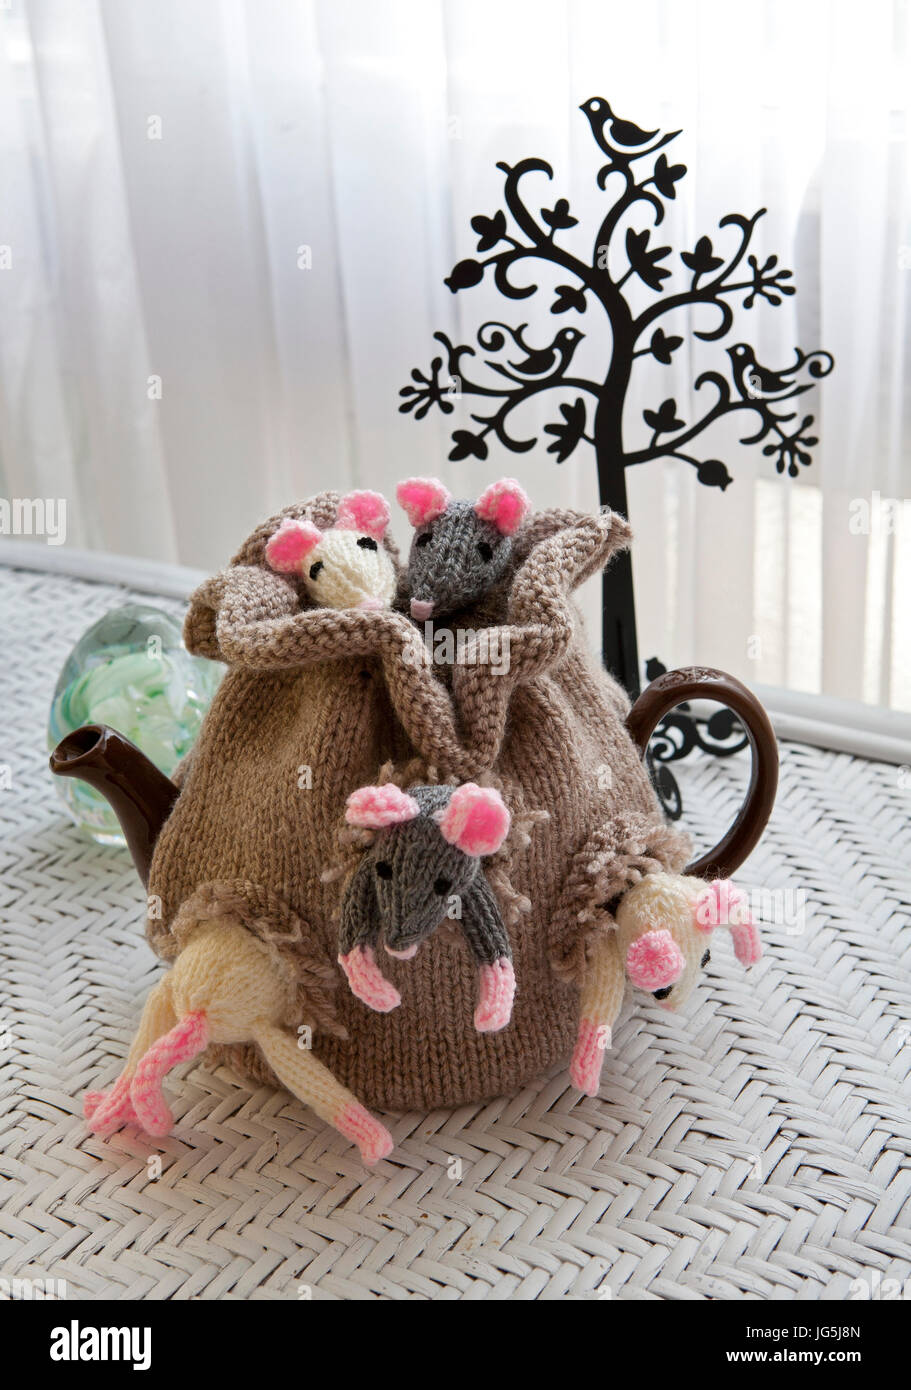 Handknitted tea cosy depicting a sack of mice Stock Photo